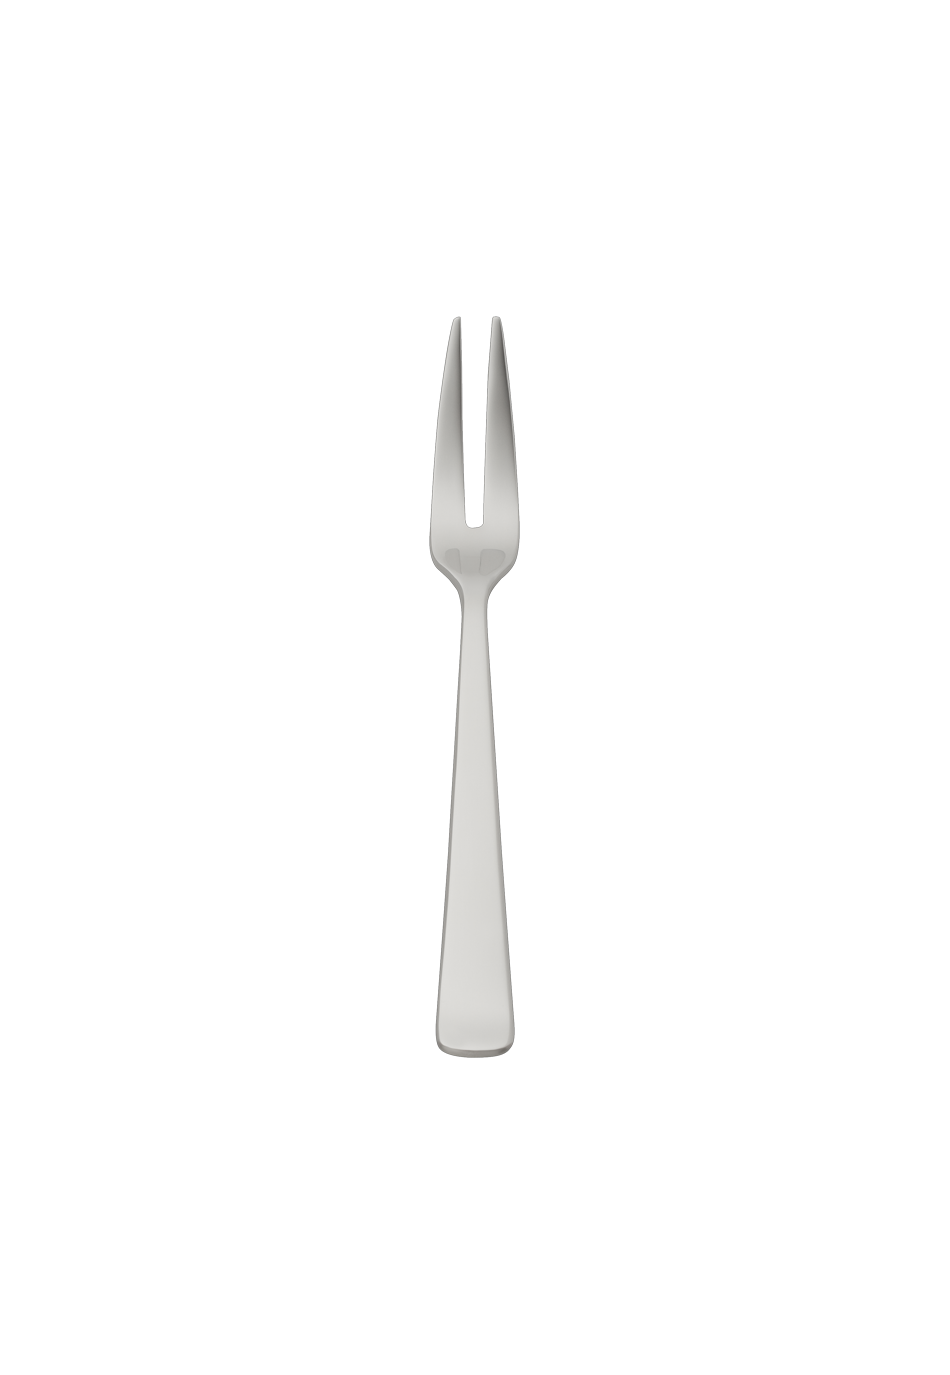 Atlantic Brillant Meat Fork, large (18/8 stainless steel)